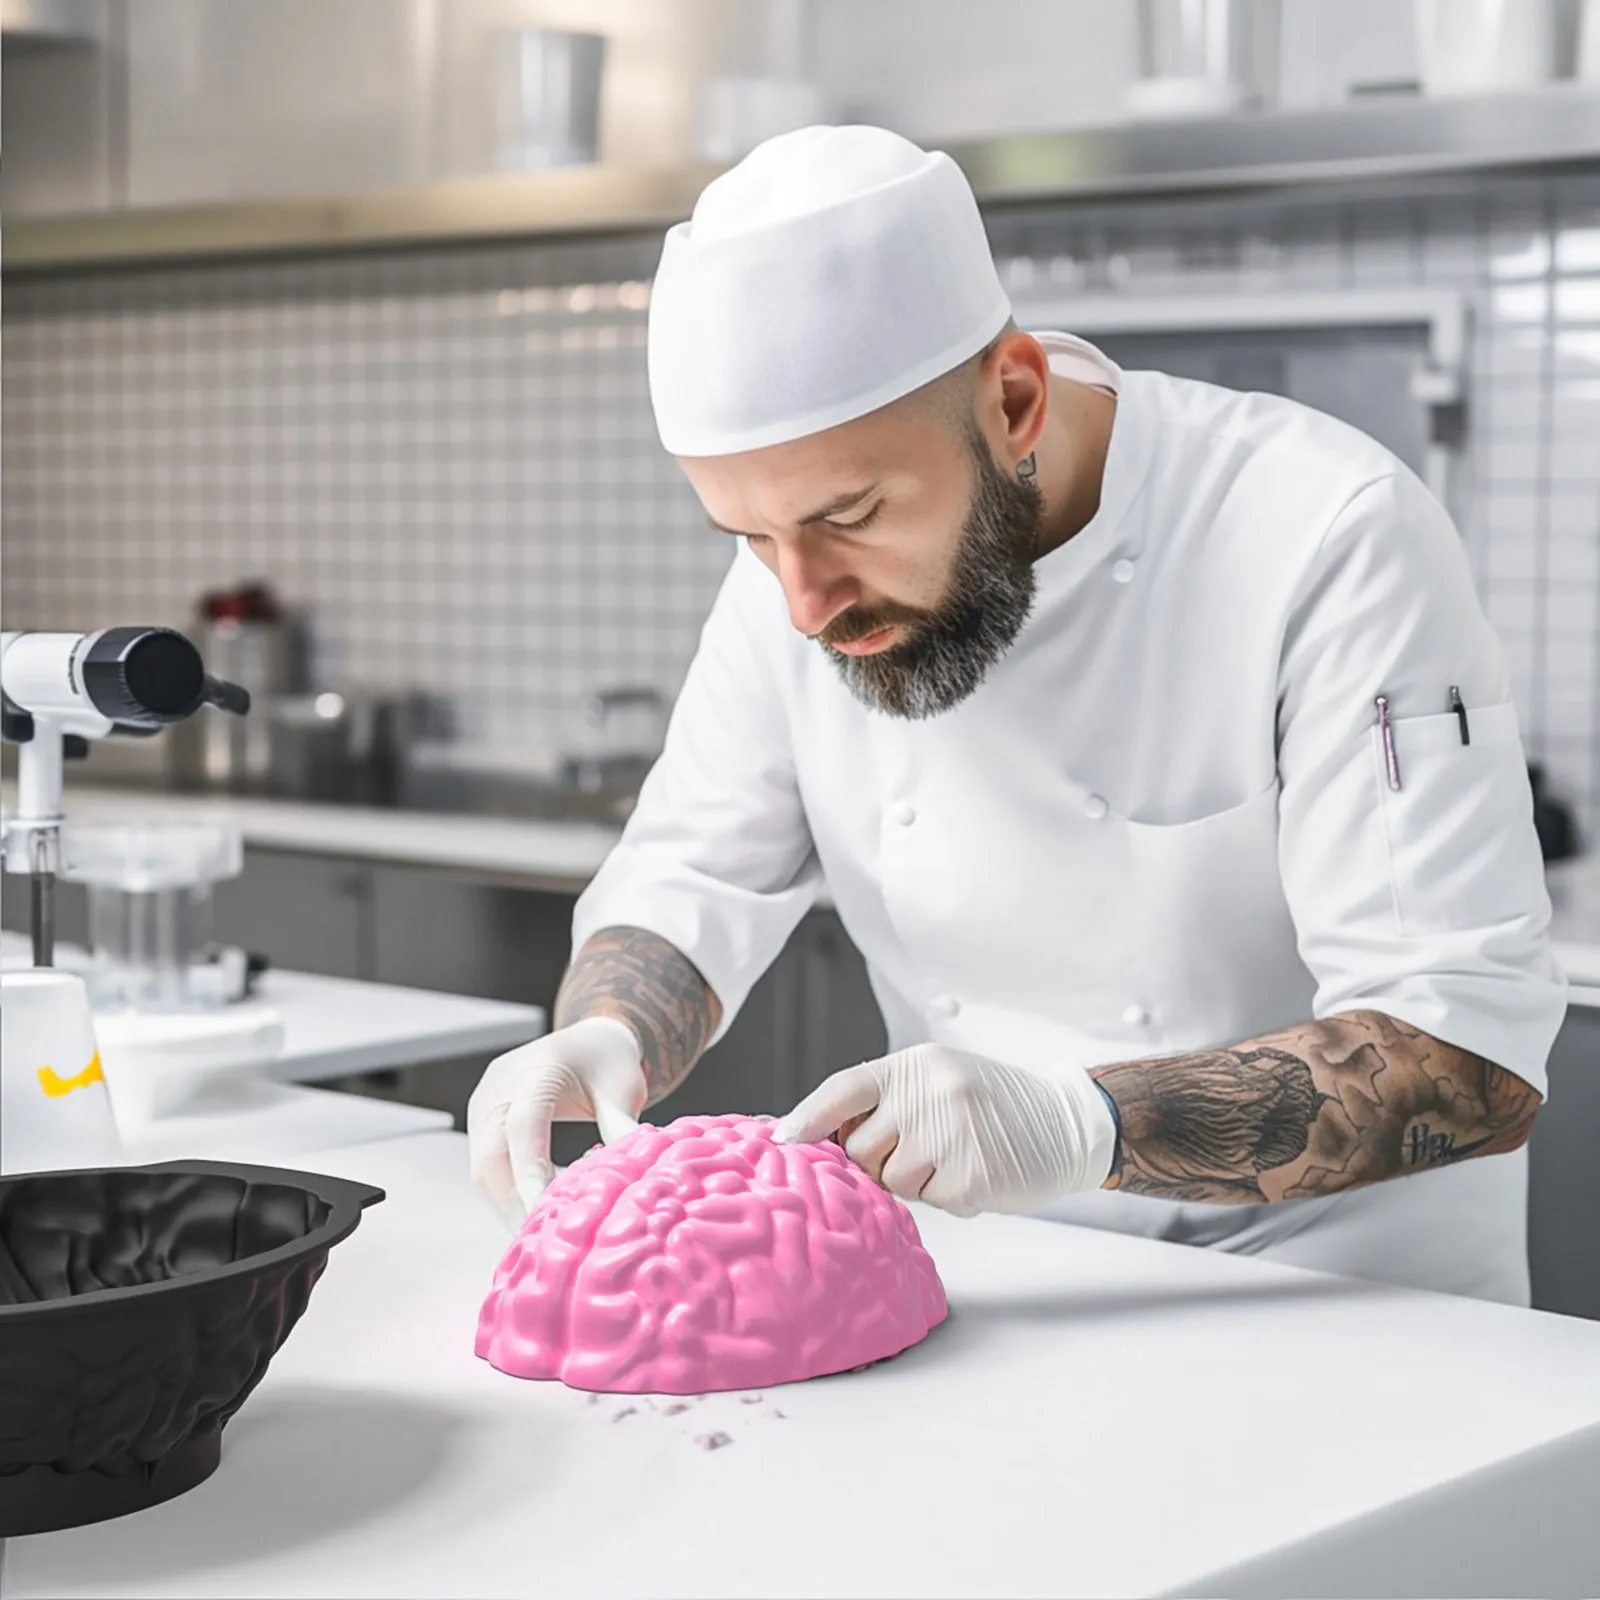 

Human Brain Shaped Silicone Cake Mold Baking Tool Fondant Chocolate Dessert Soap Mould Decorative Bakeware Kitchen Accessories